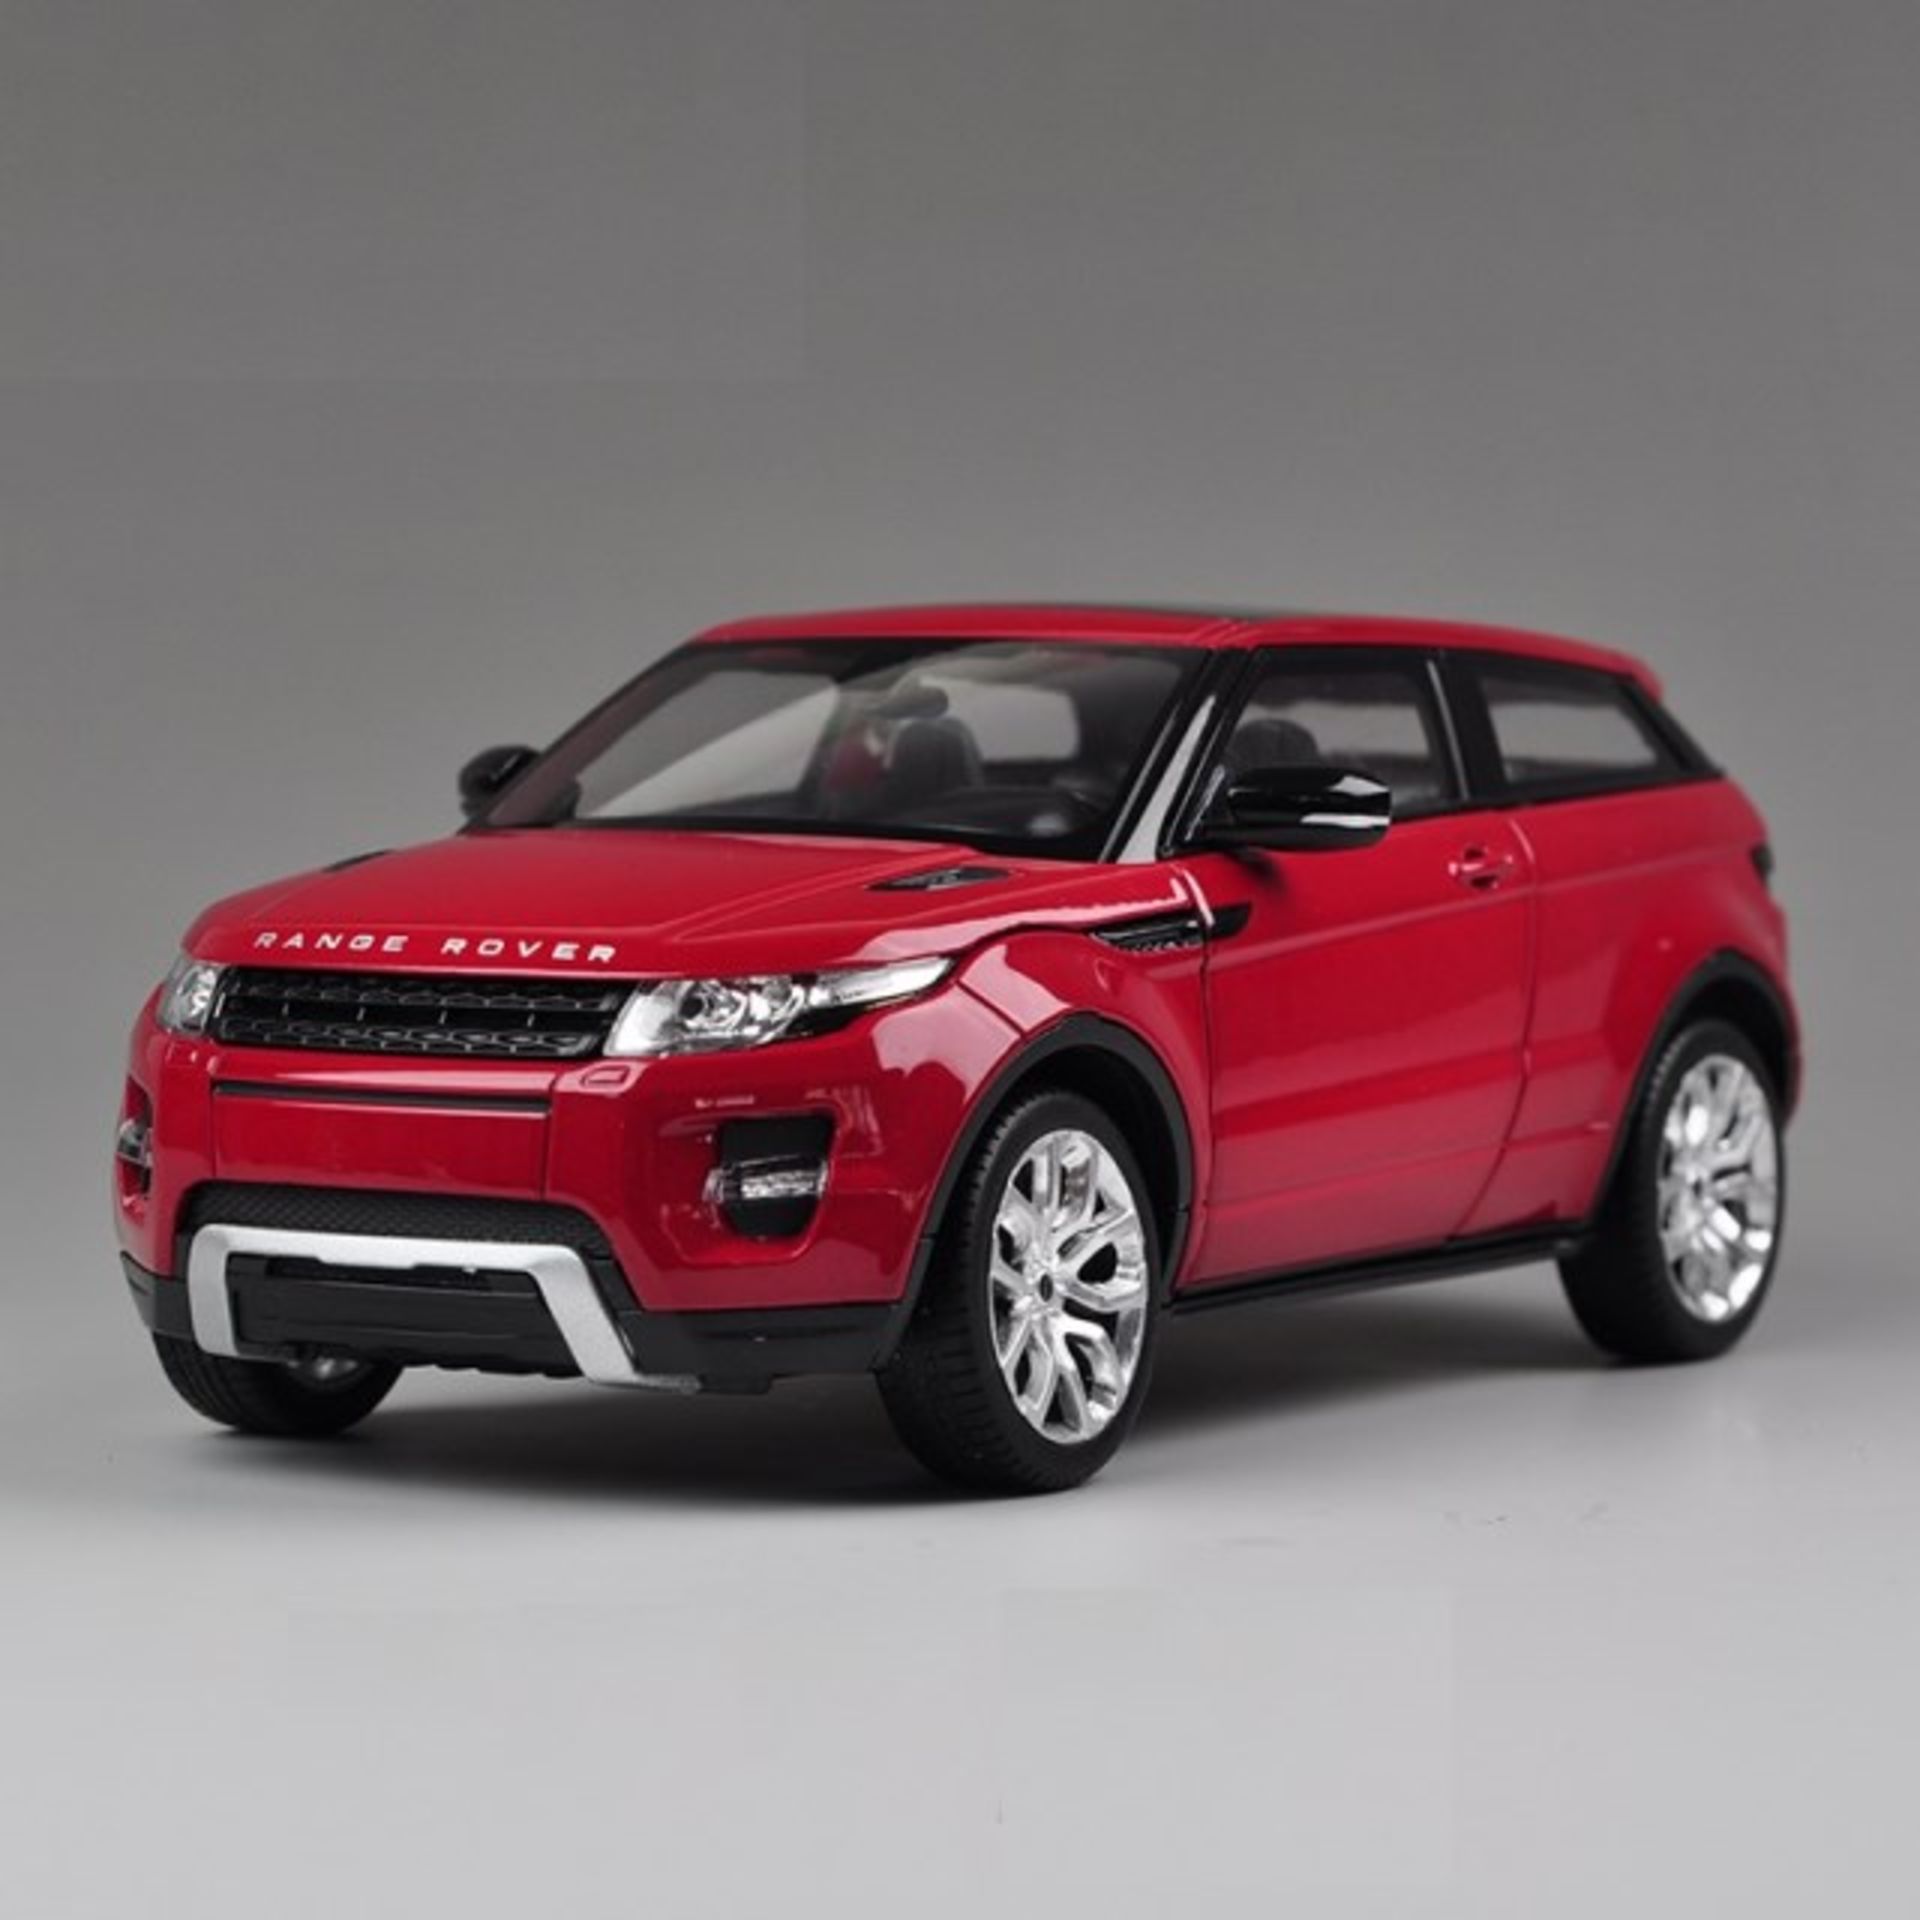 V Brand New 1:24 Scale R/C Range Rover Evoque Officially Licensed Product X 2 Bid price to be